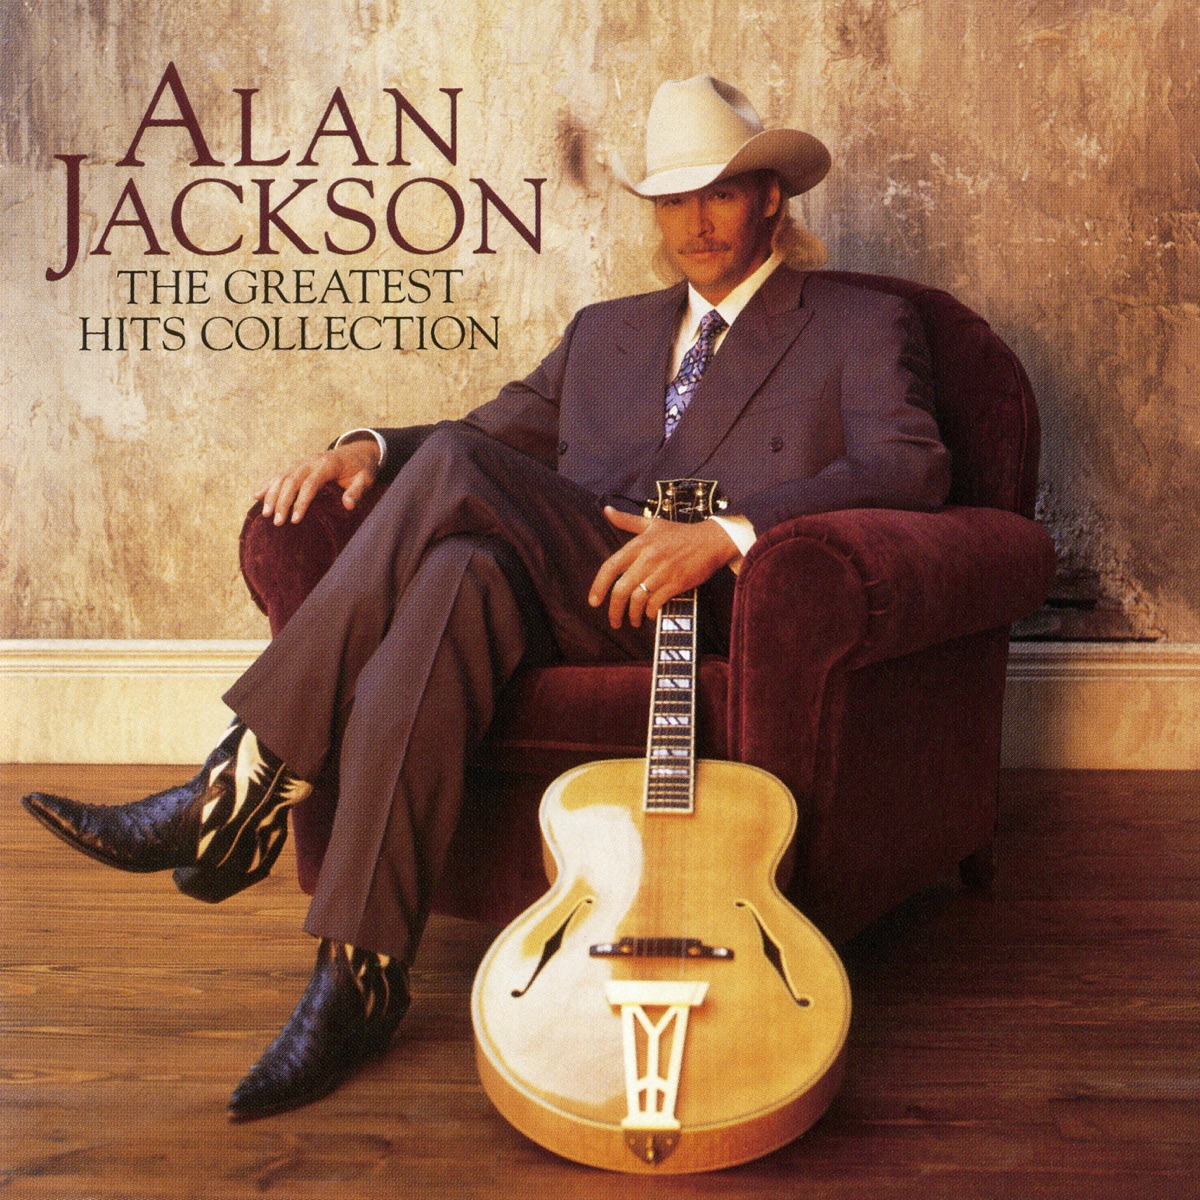 Alan Jackson The Greatest Hits Collection Album Cover By Alan Jackson 